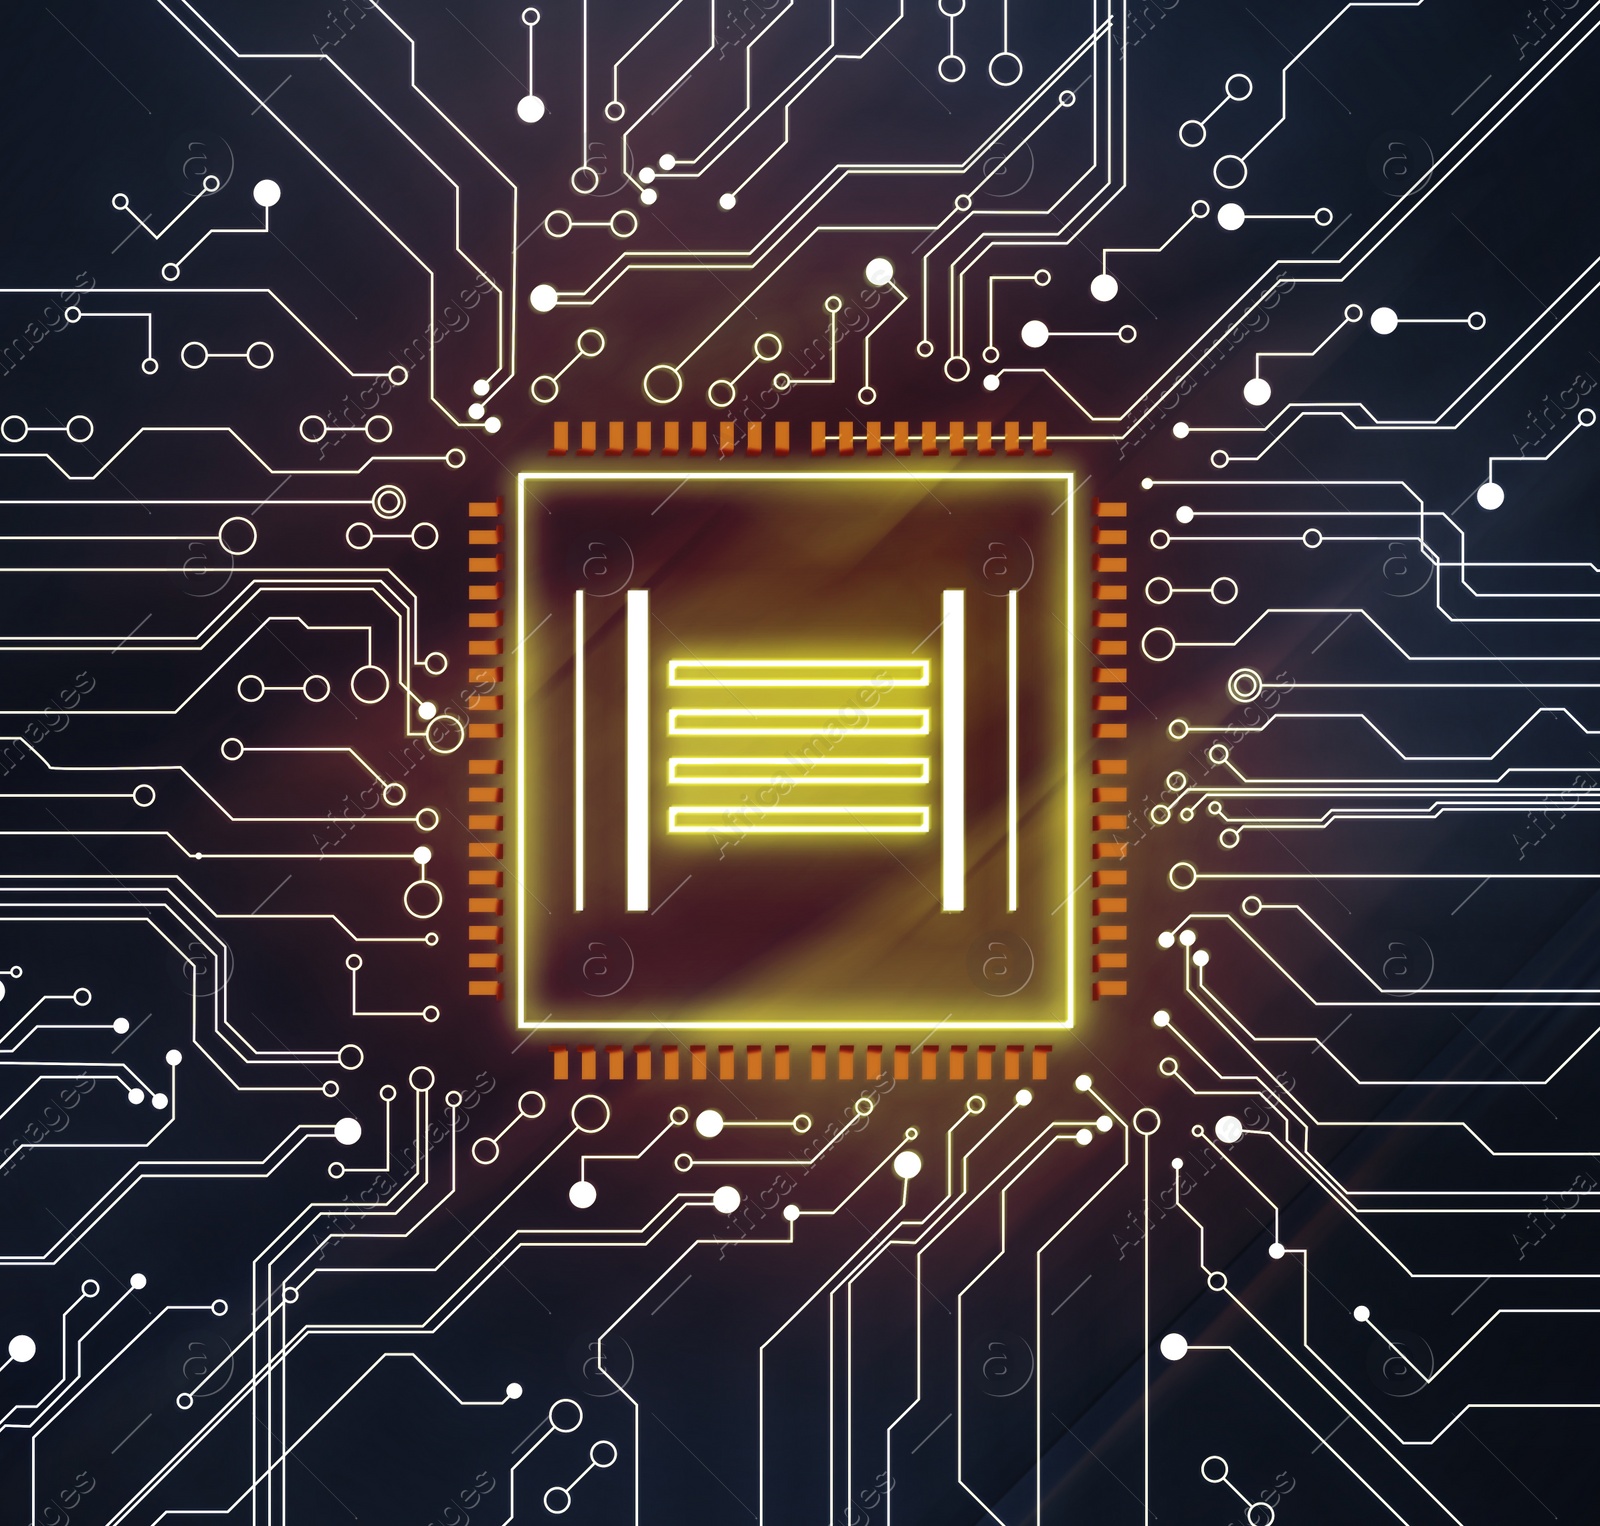 Illustration of Electronics and technology. Circuit board with chip pattern illustration